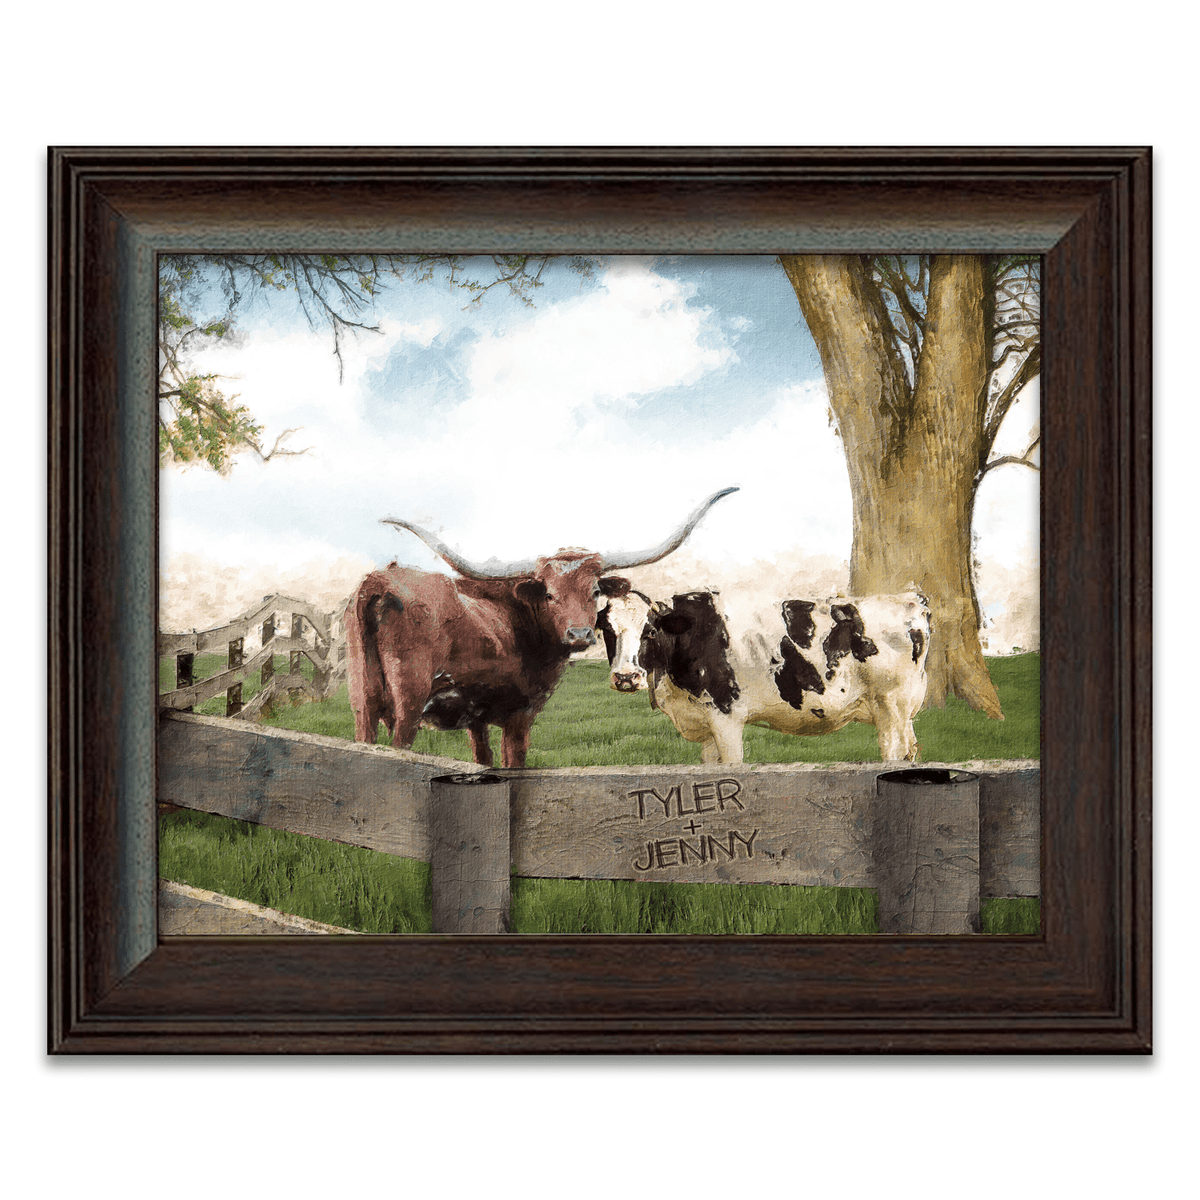 I Love Moo - Personalized Cow Gifts from Personal Prints